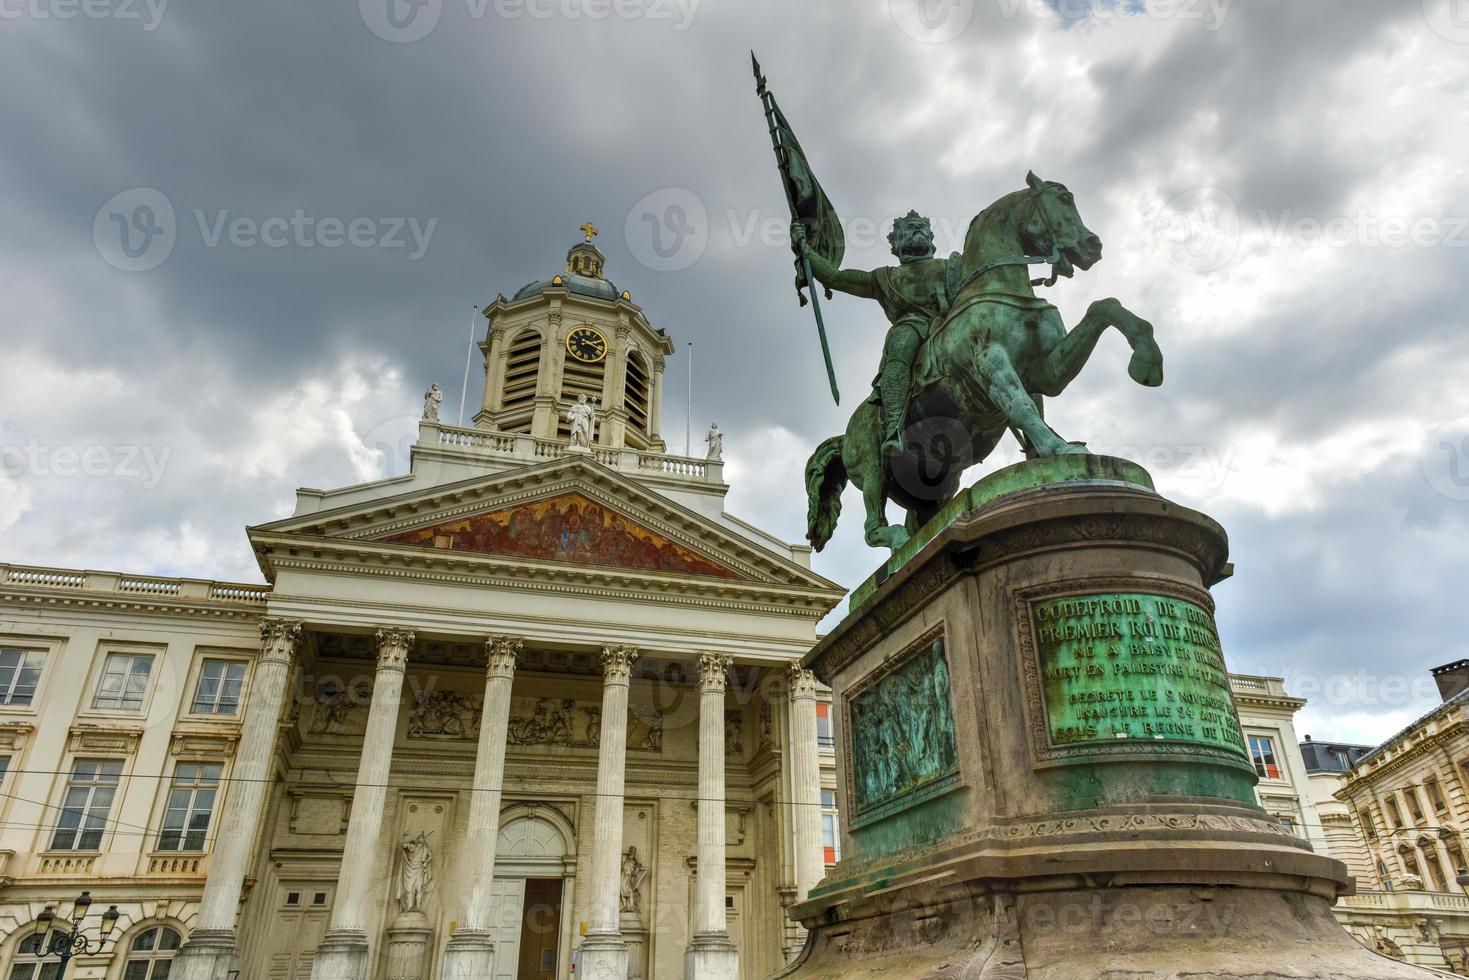 Coudenberg, the former Palace of Brussels, Belgium. The statue of Godfrey, Duc of Bouillon and Church of Saint Jacques-sur-Coudenberg in Royal Square. photo